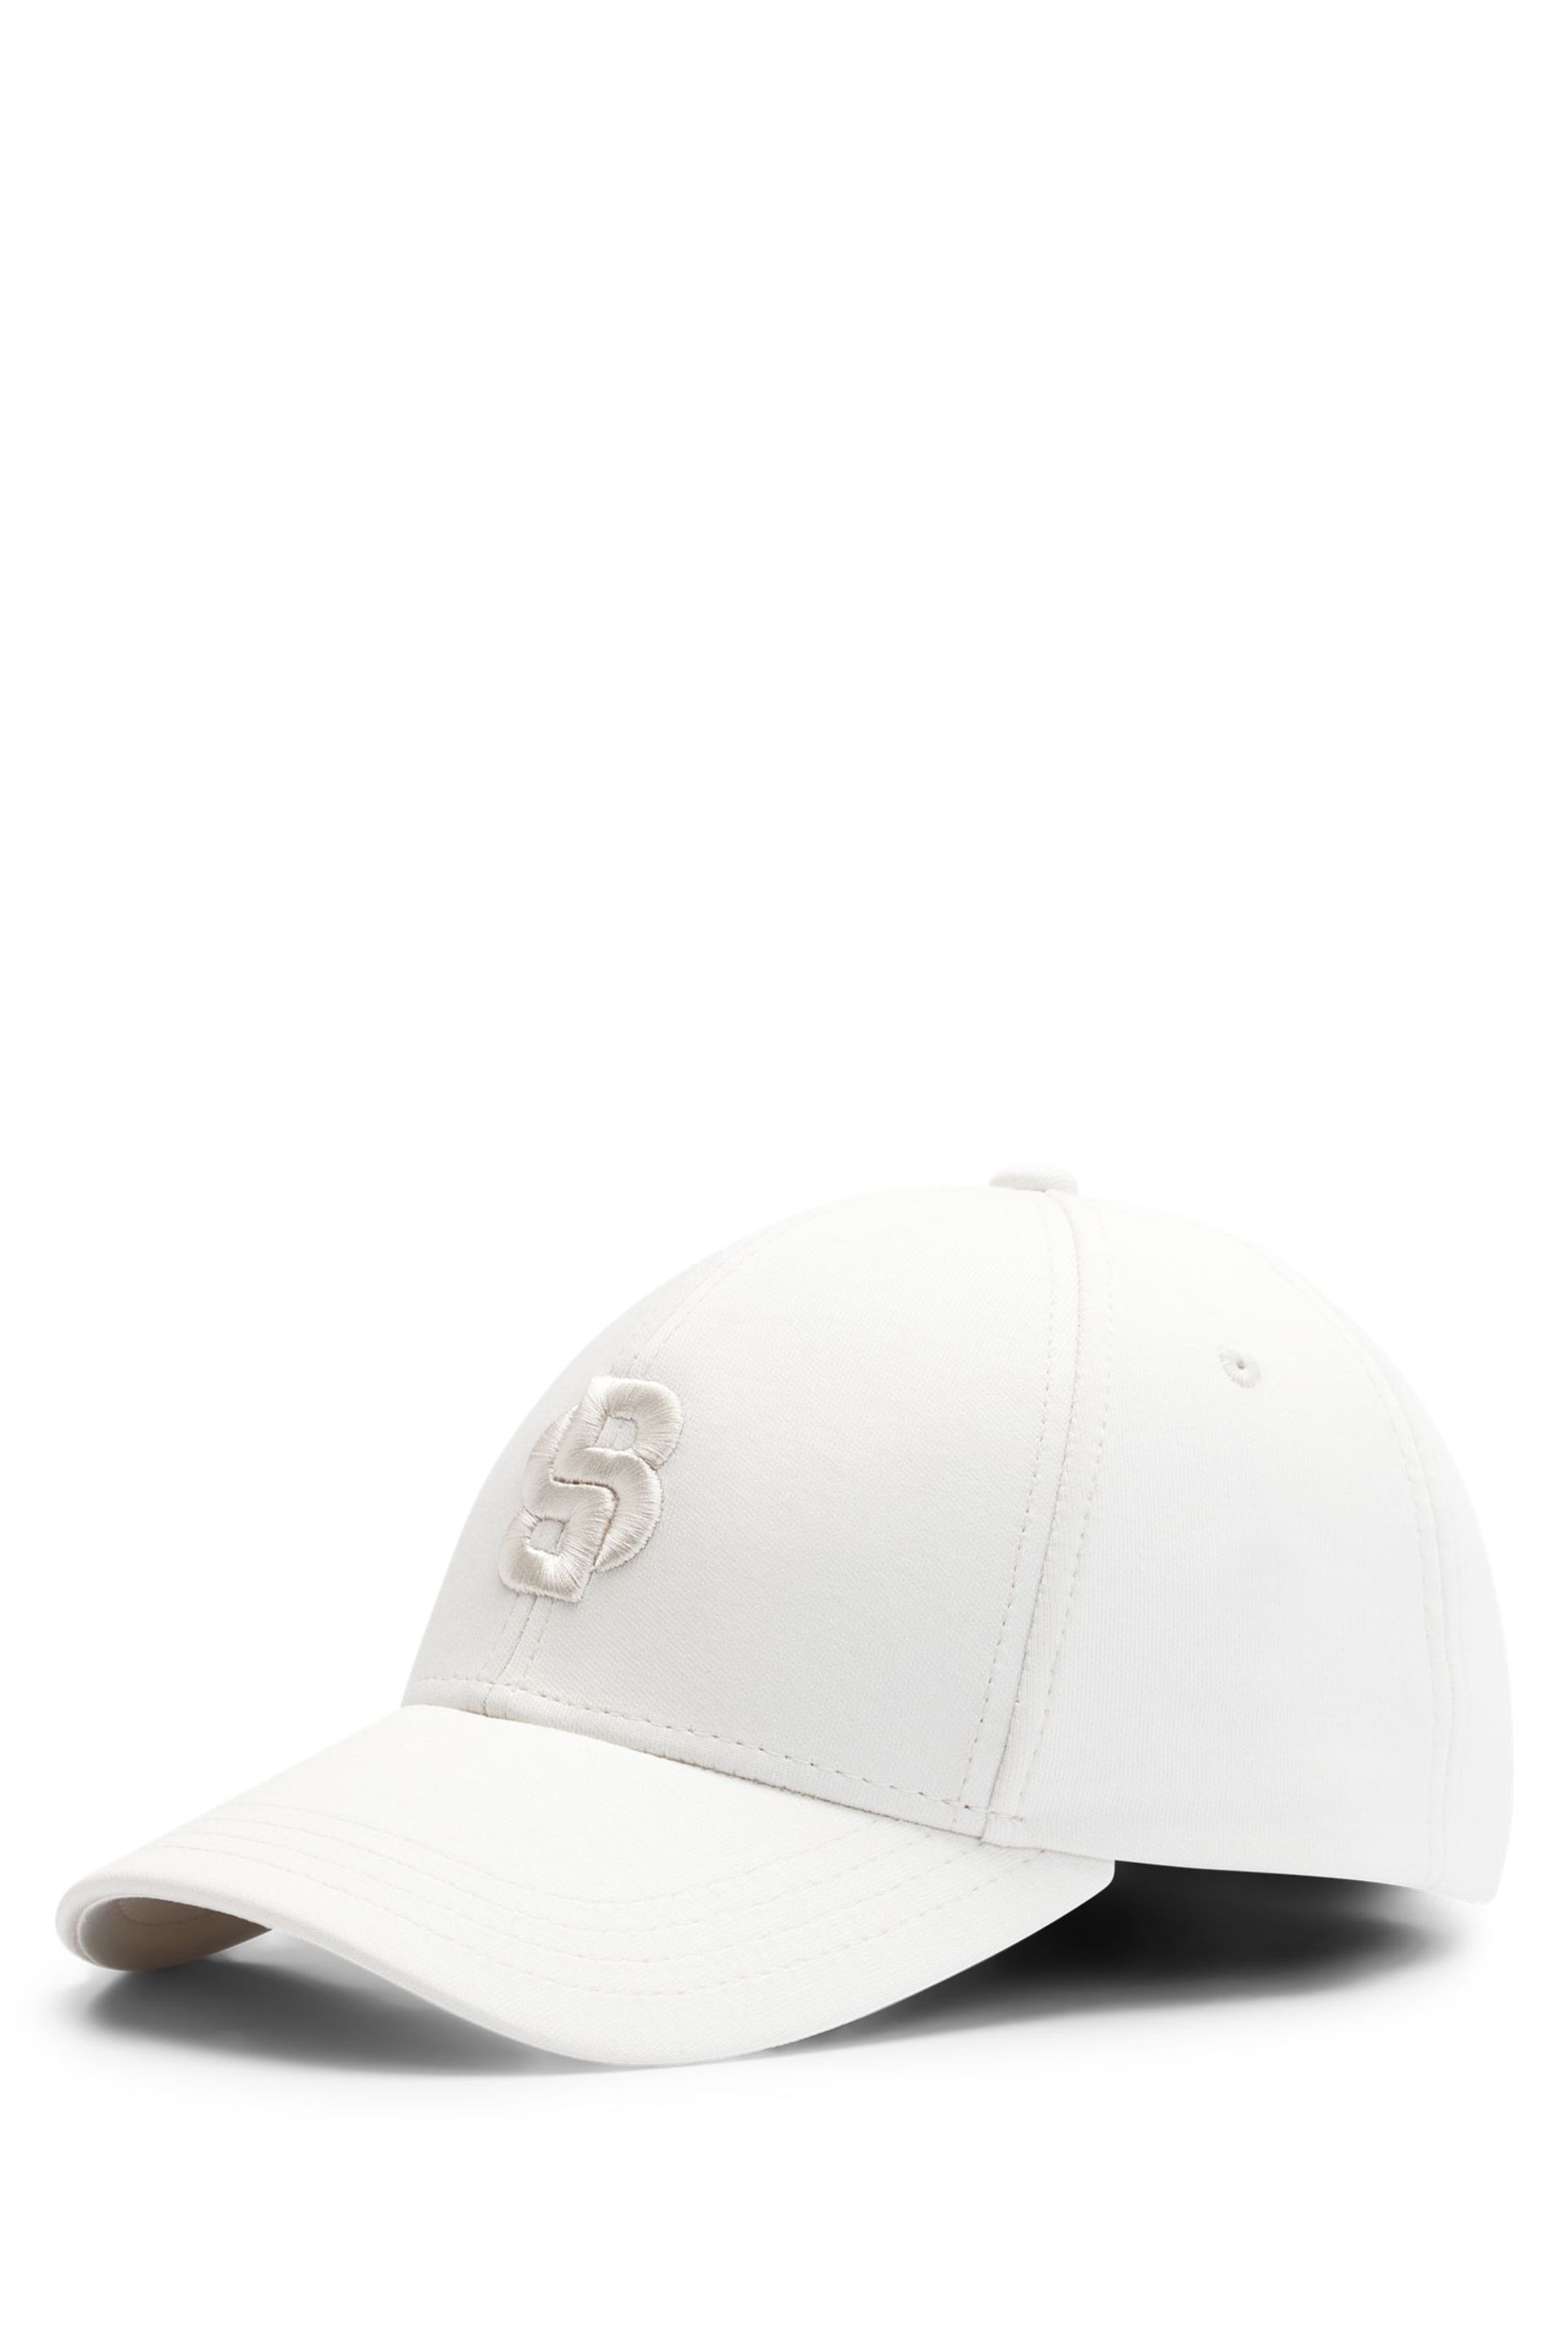 BOSS White Cotton-Blend Cap With Embroidered Double Monogram - Image 1 of 3